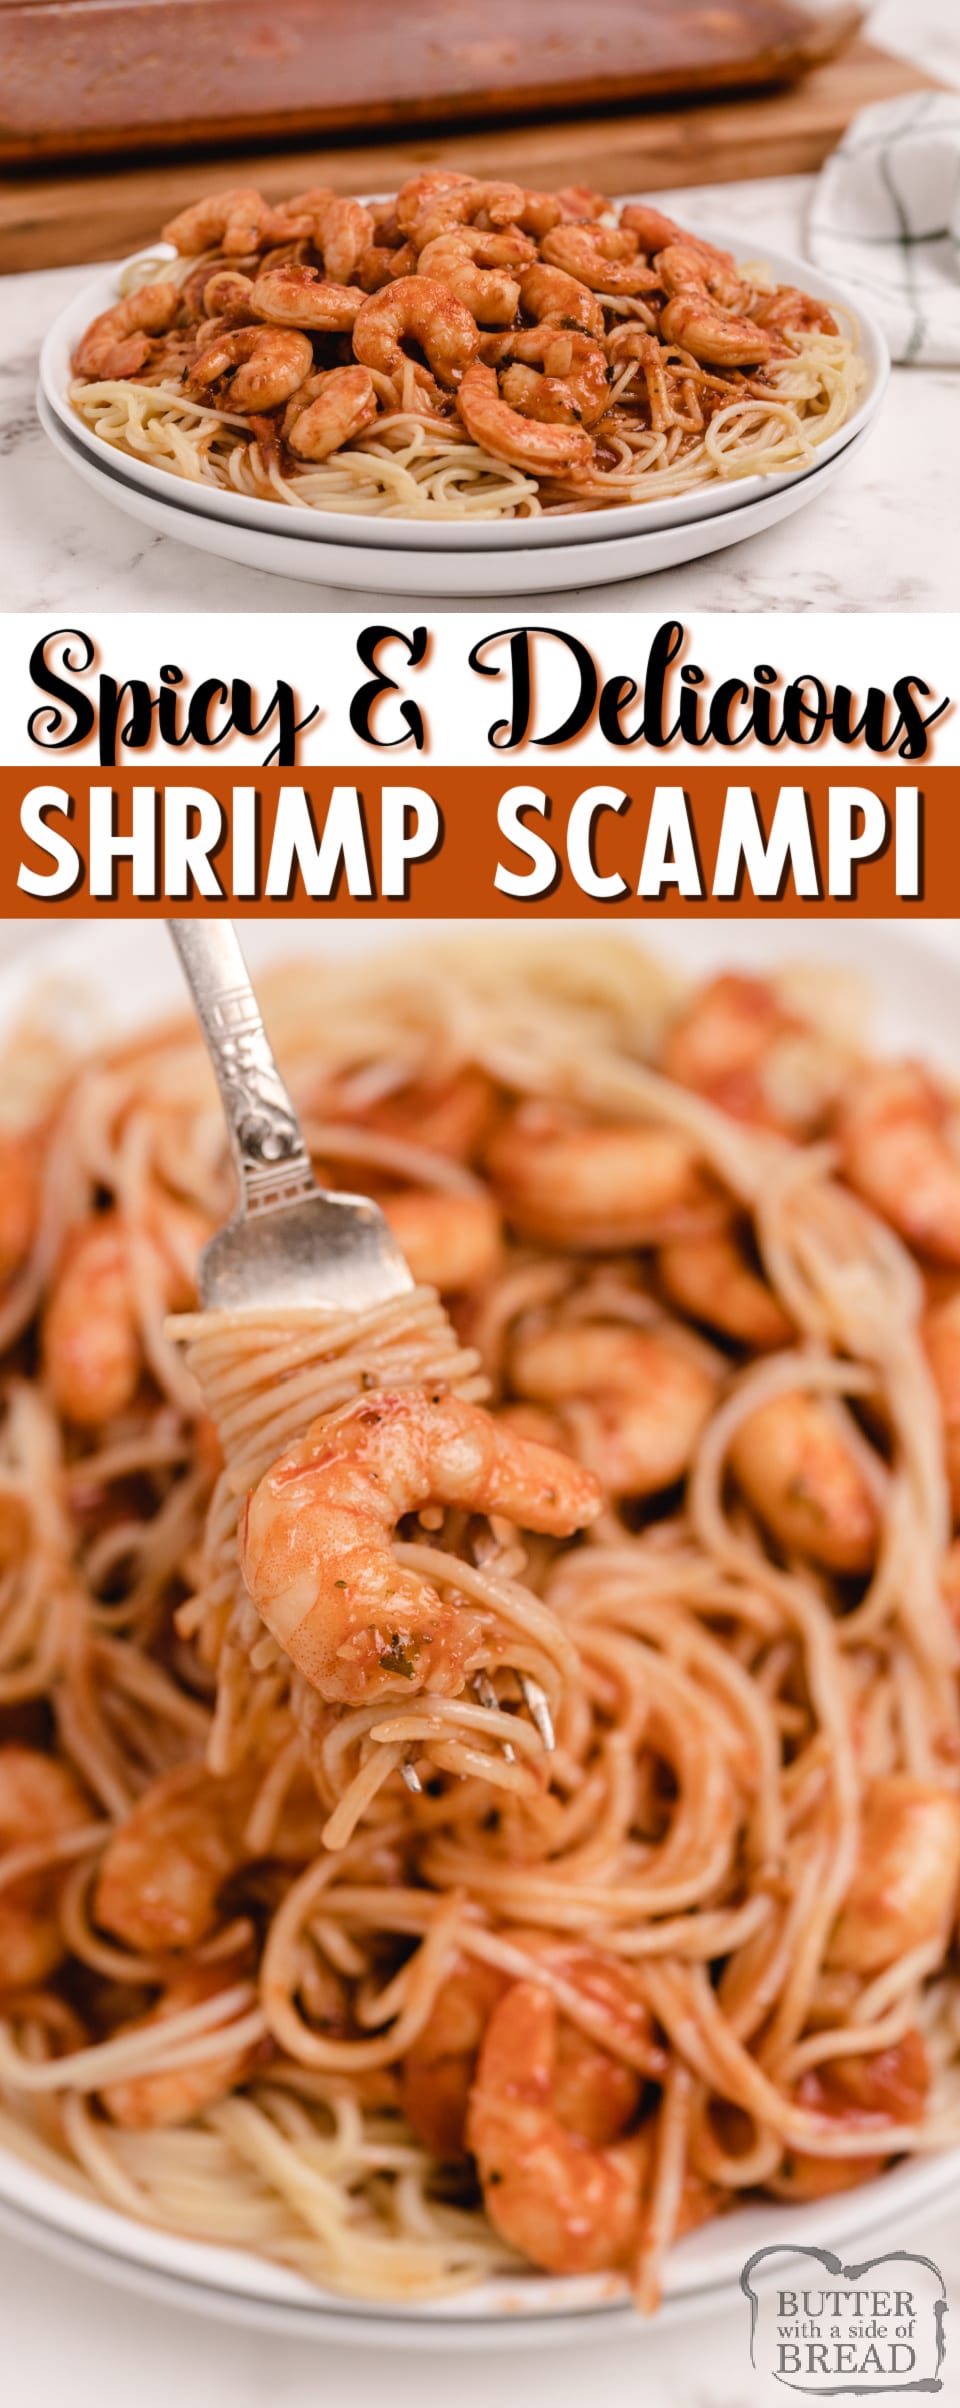 Spicy Shrimp Scampi is buttery, full of flavor and tastes delicious over angel hair pasta. This buttery scampi sauce with shrimp is simple, impressive and only takes a few minutes to prep.